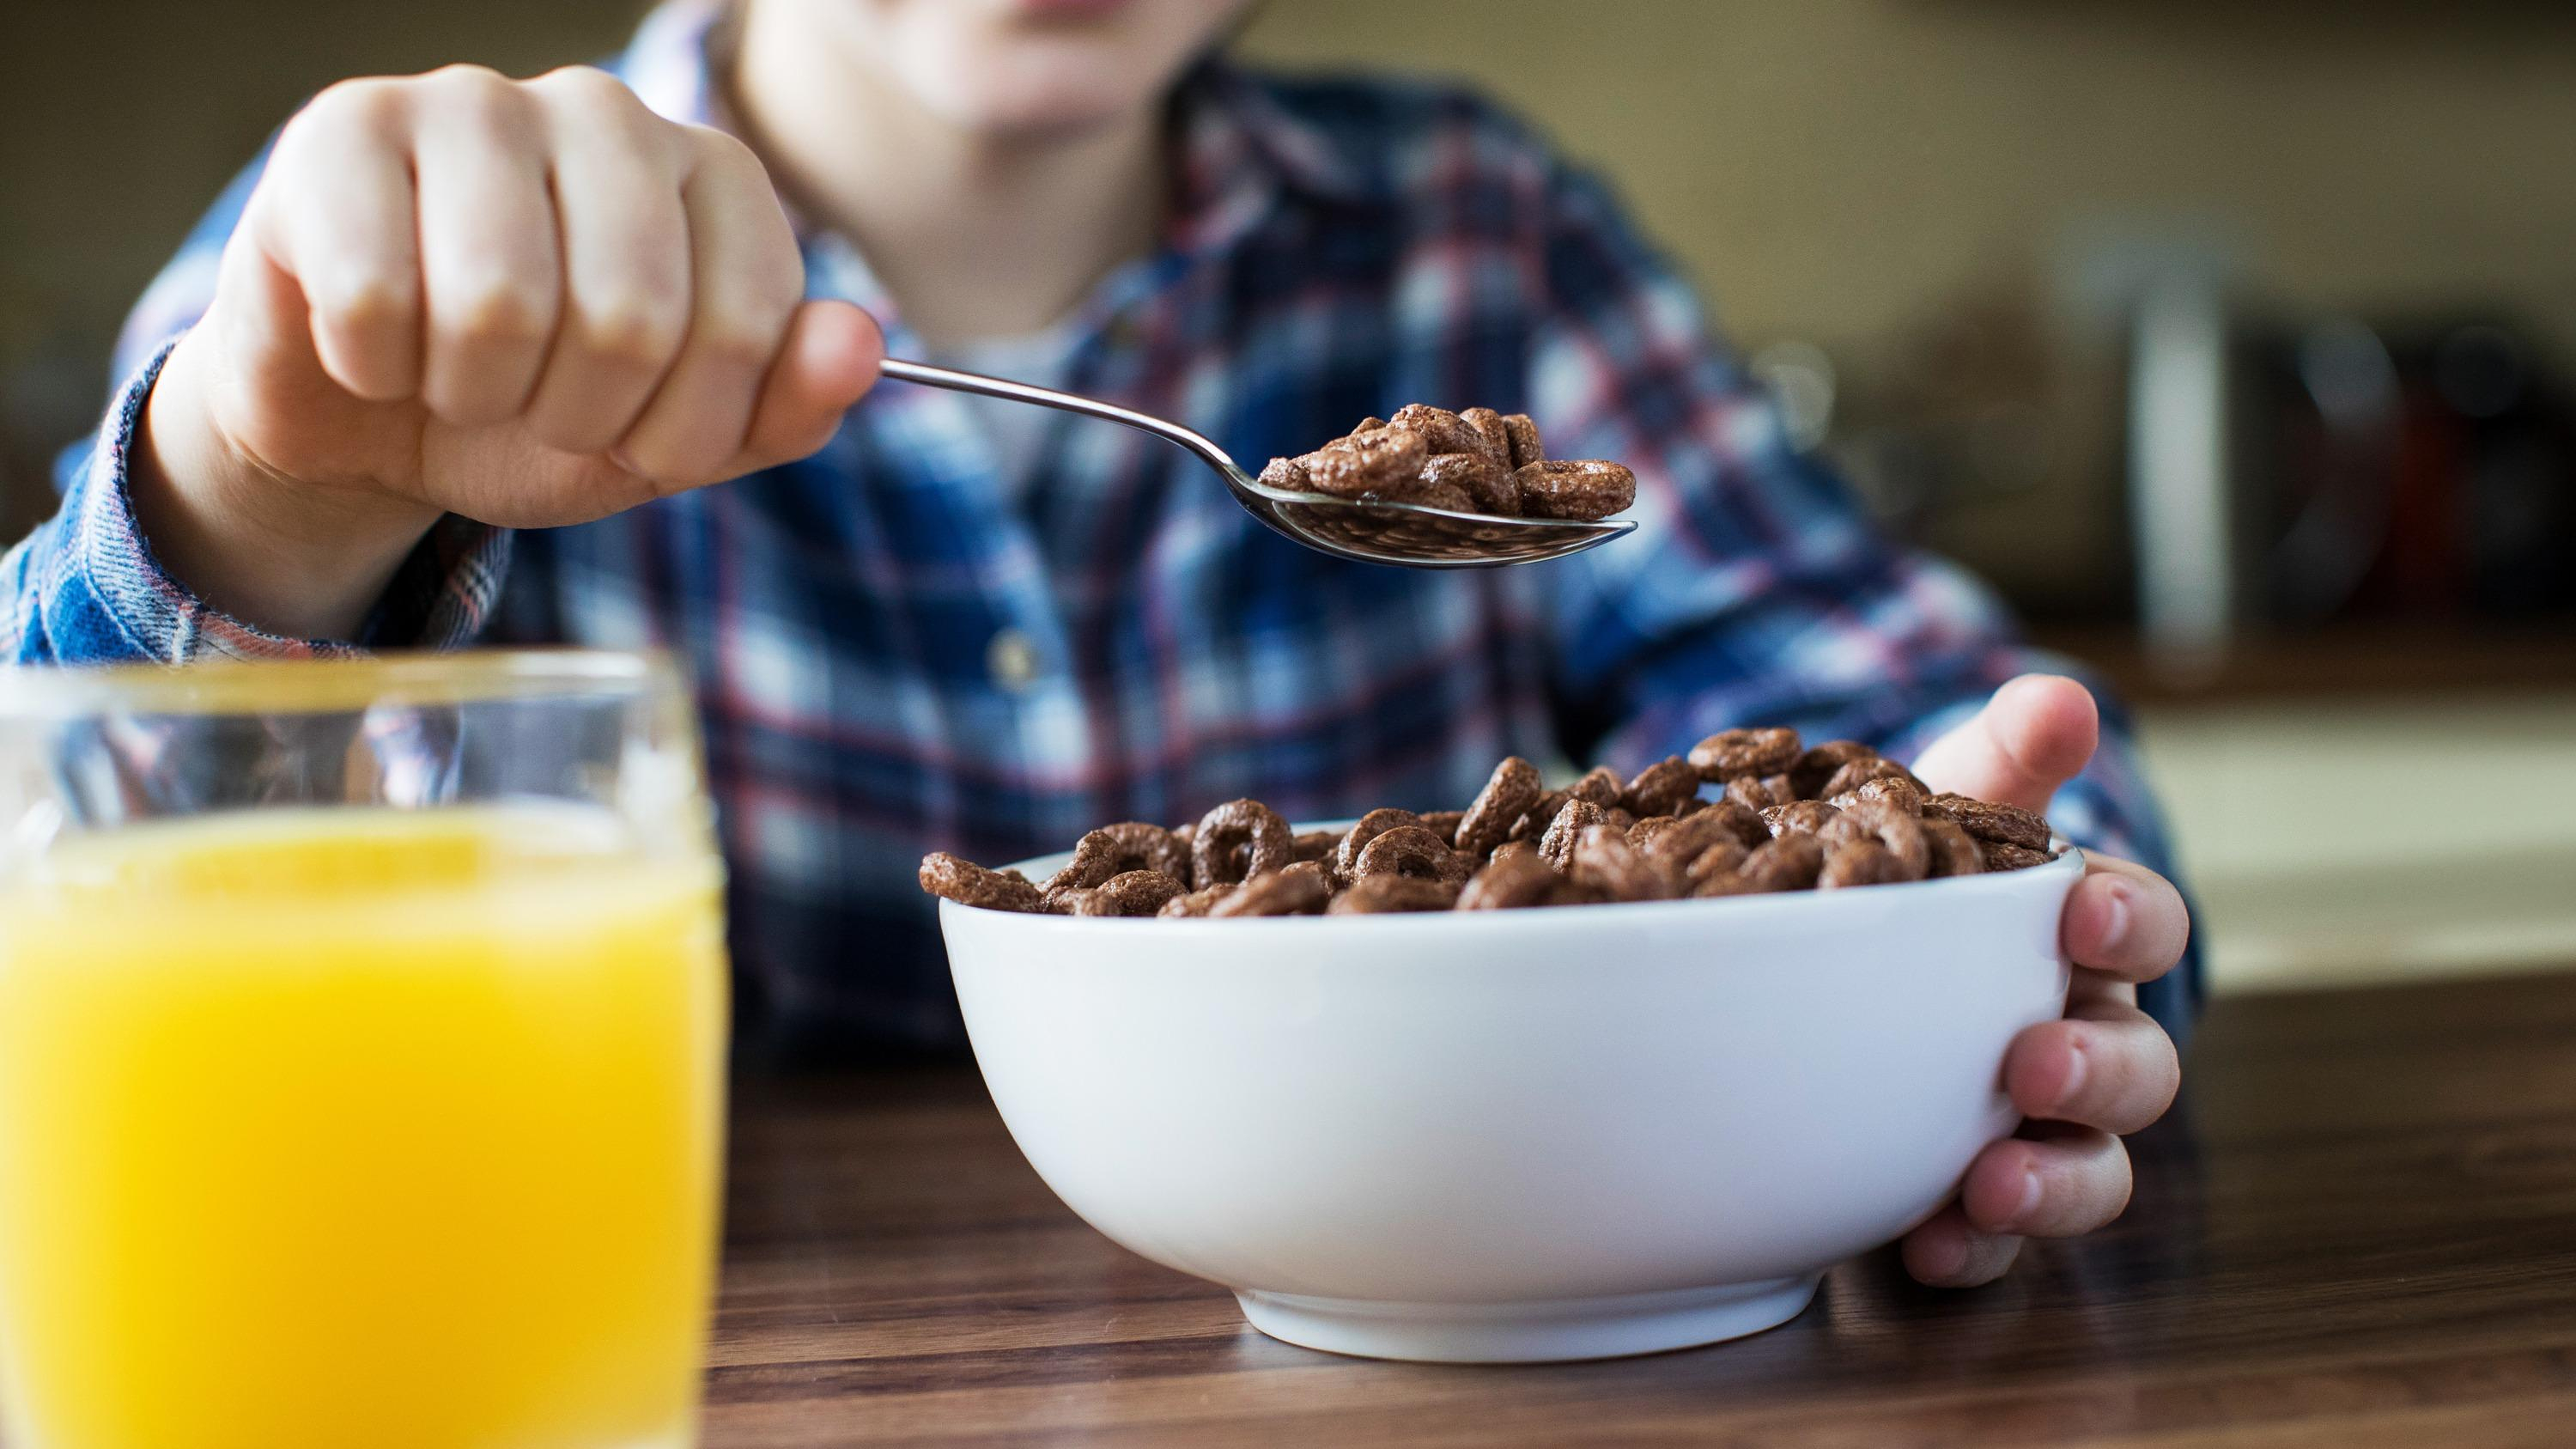 Eating cereal at dinner to deal with inflation, the Kellogg's CEO's idea that doesn't work